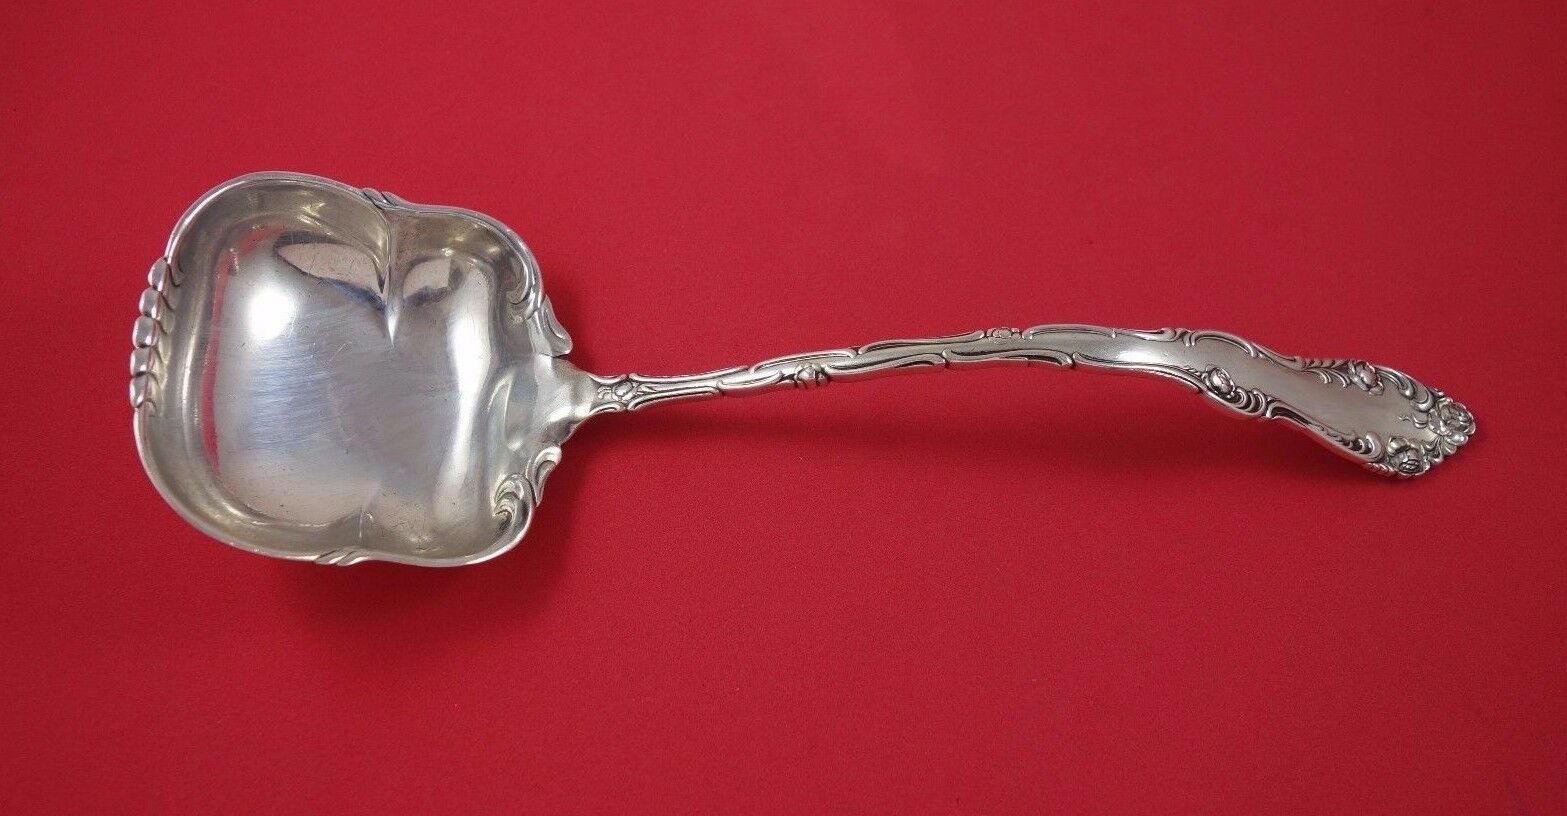 Charlemagne by Towle Sterling Silver Iced Tea Spoon 7 3/4" Vintage Silverware 